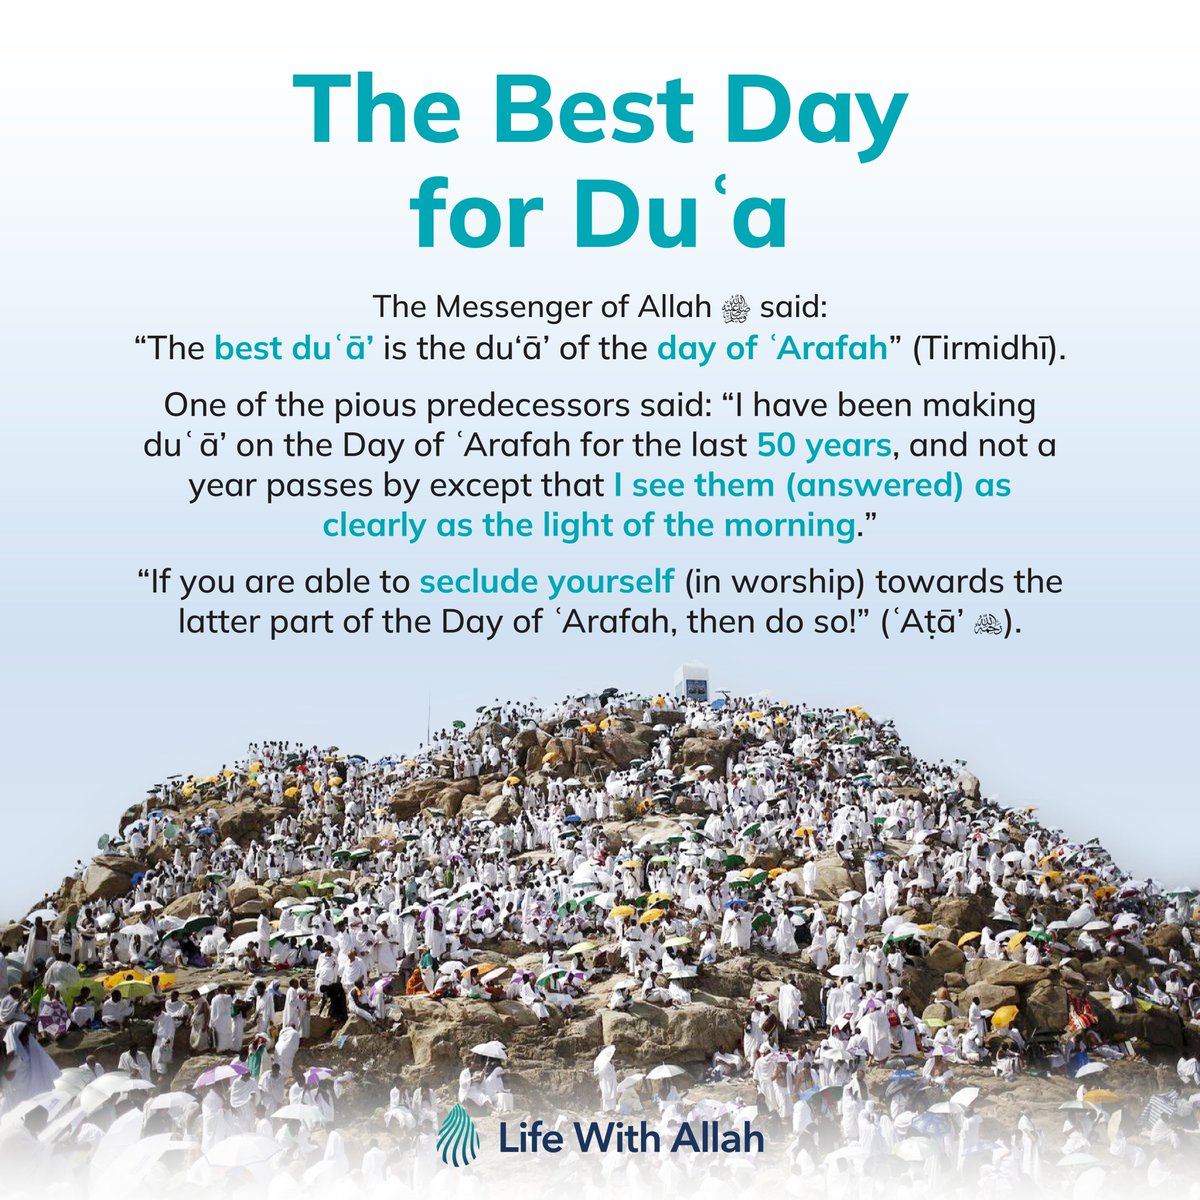 The Best Day for Du'a

The Messenger of Allah ﷺ said: “The best duʿā’ is the duʿā’ of the #DayofArafah . (Tirmidhī)

One of the pious predecessors said: “I have been making duʿā’ on the Day of #Arafah for the last 50 years, and not a year passes by except that I see them